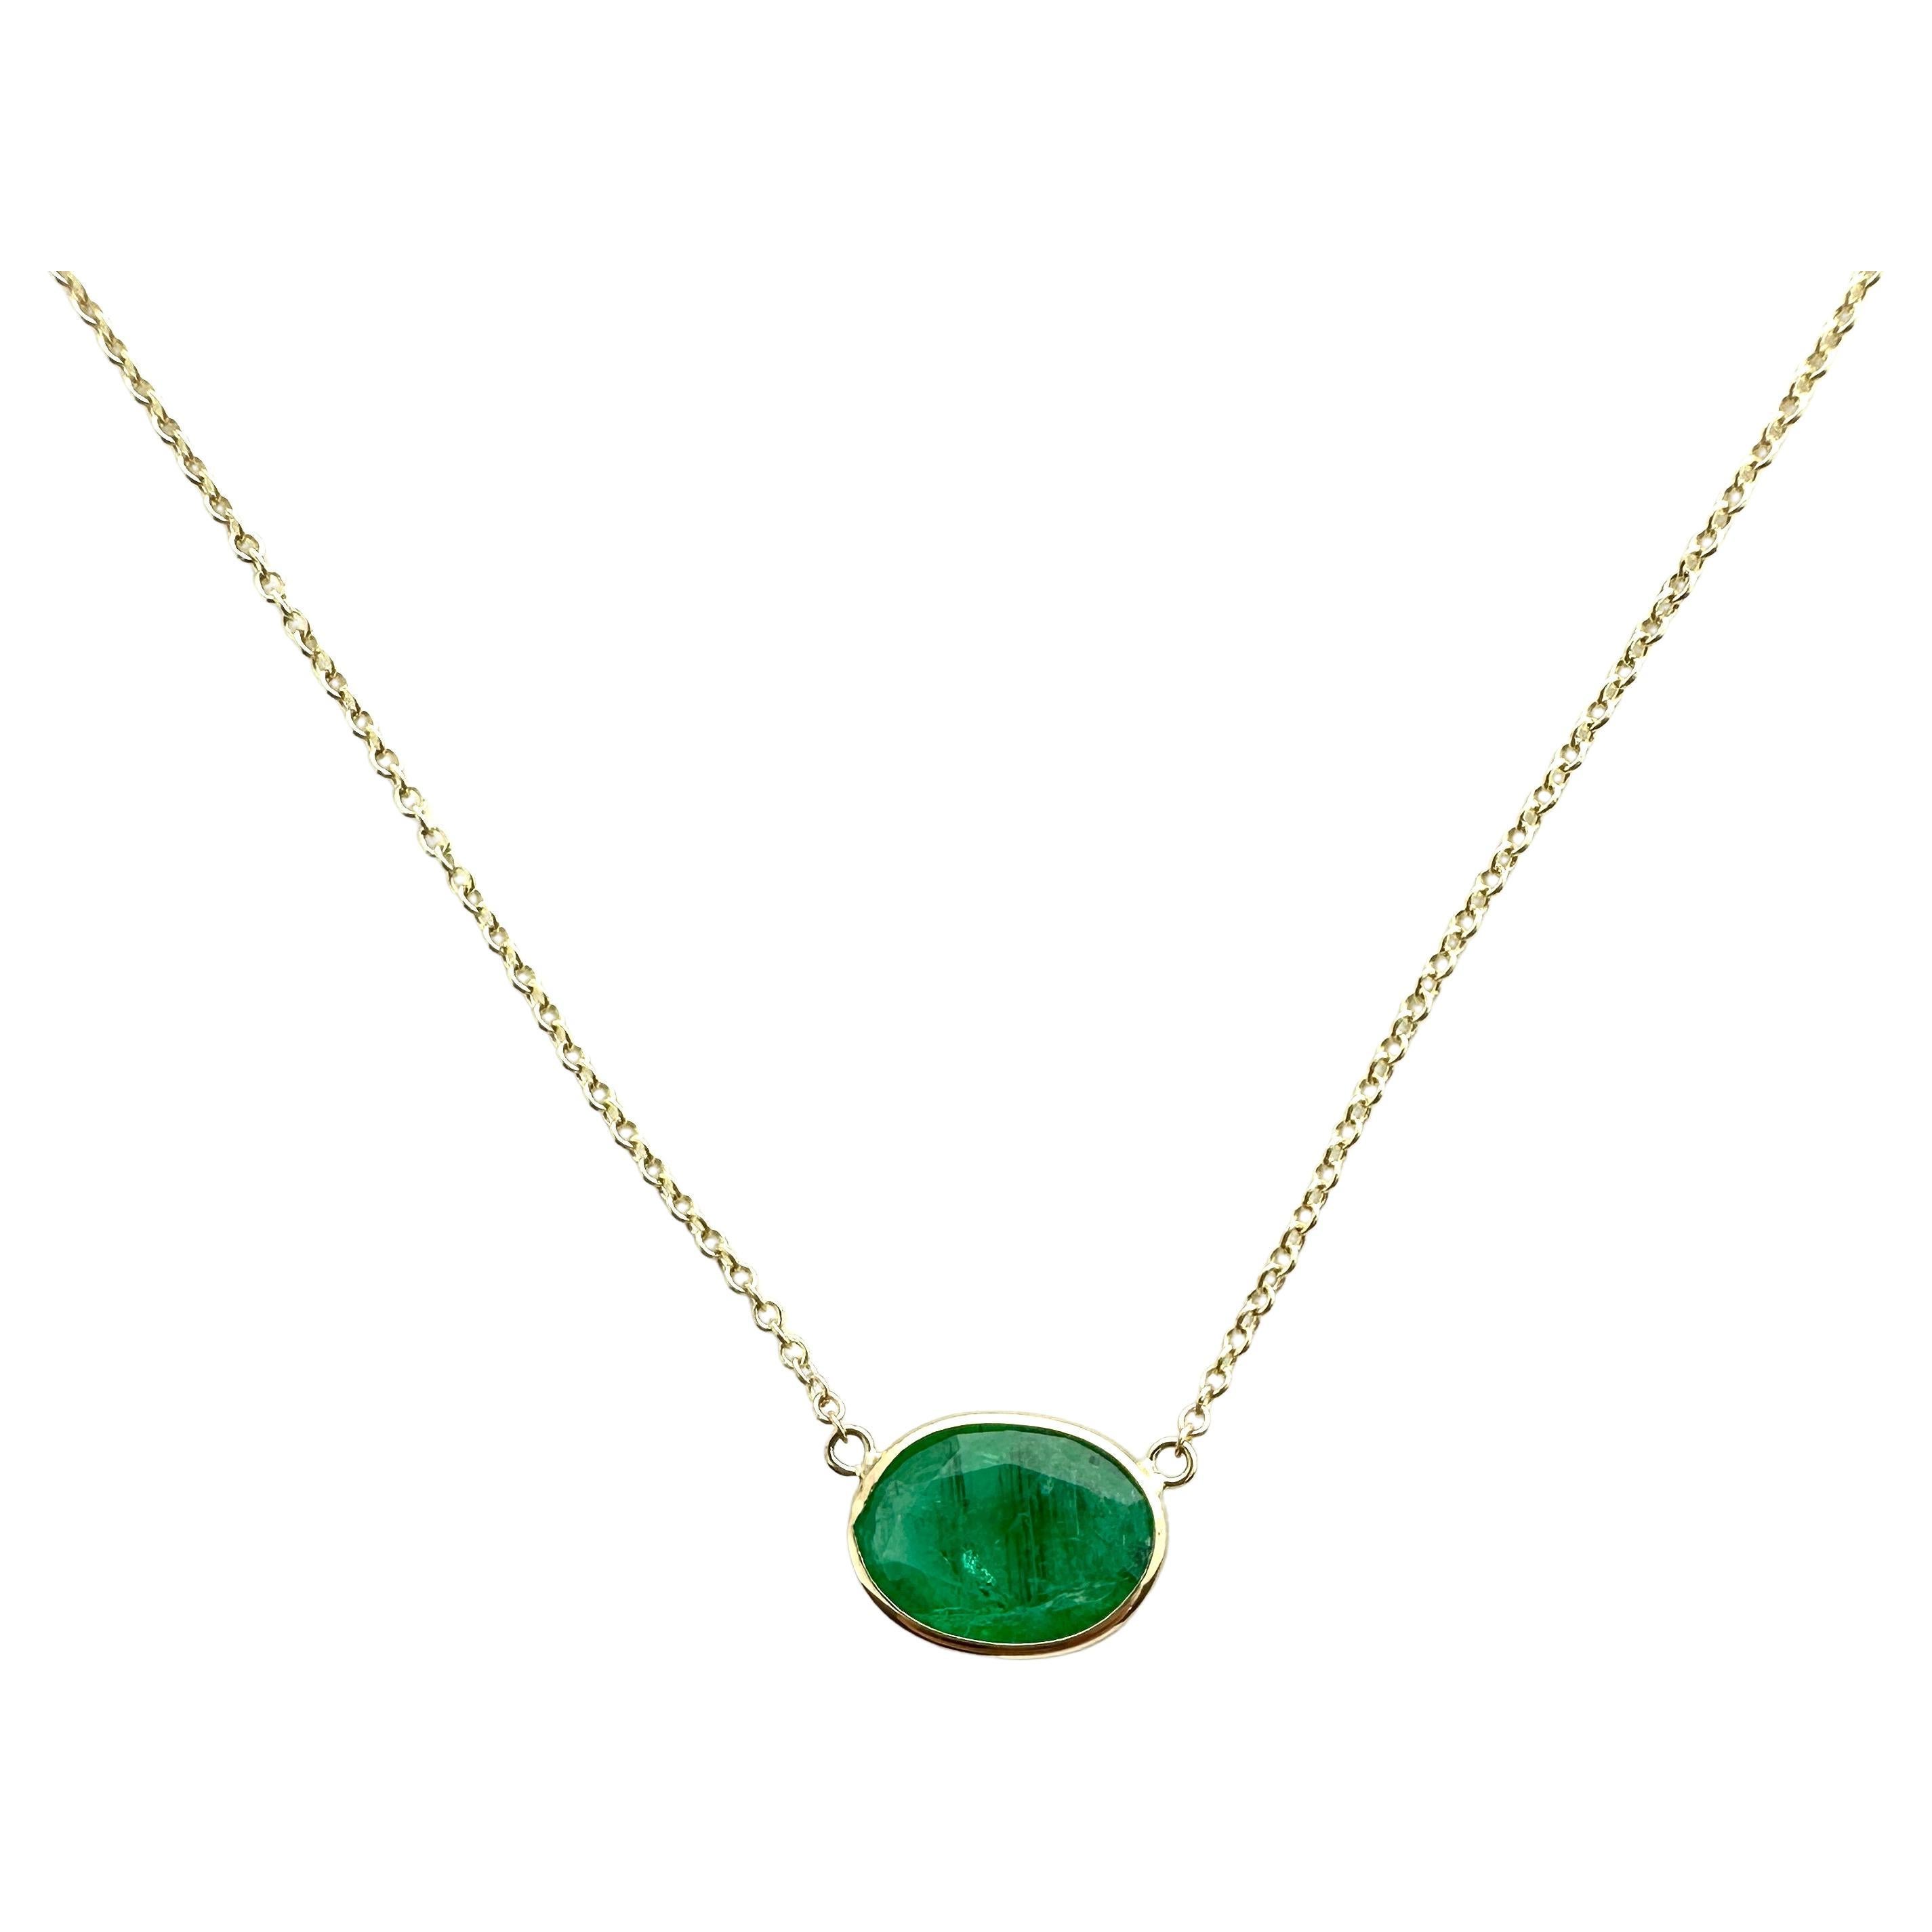 3.09 Carat Emerald Oval & Fashion Necklaces In 14K Yellow Gold For Sale